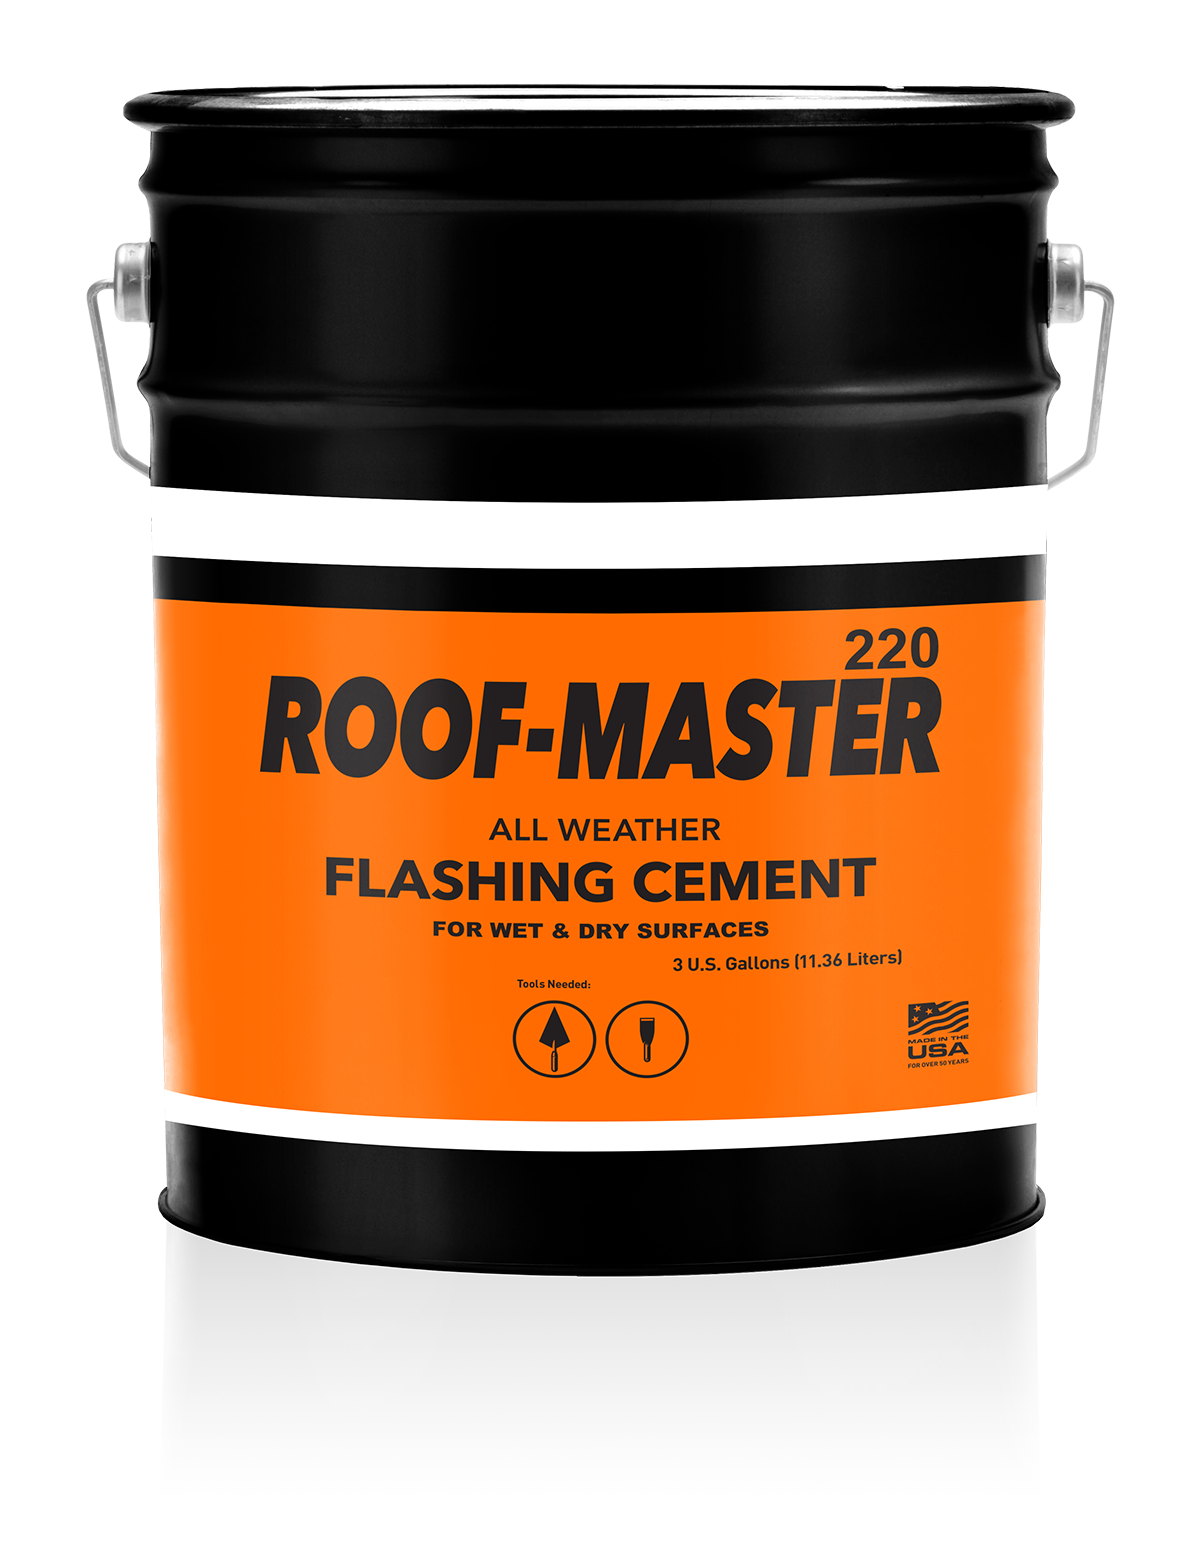 Roof-Master All Weather Flashing Cement in 5 Gallon Pail